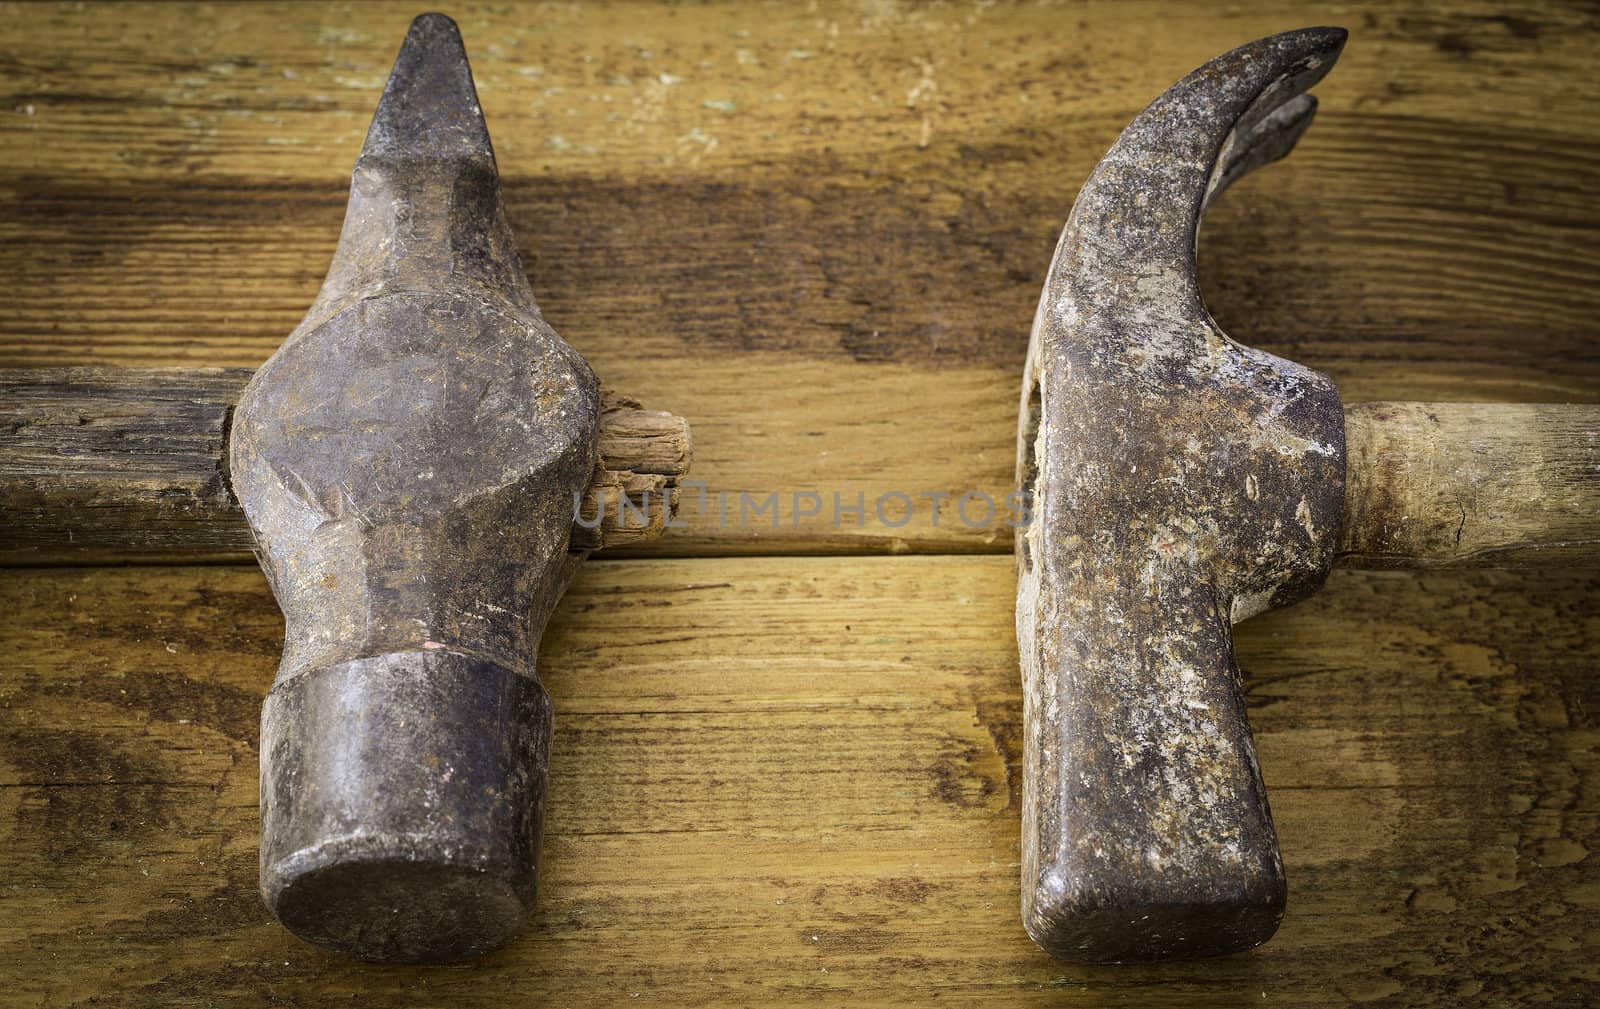 Group of  old oxide vintage tools. Hammers